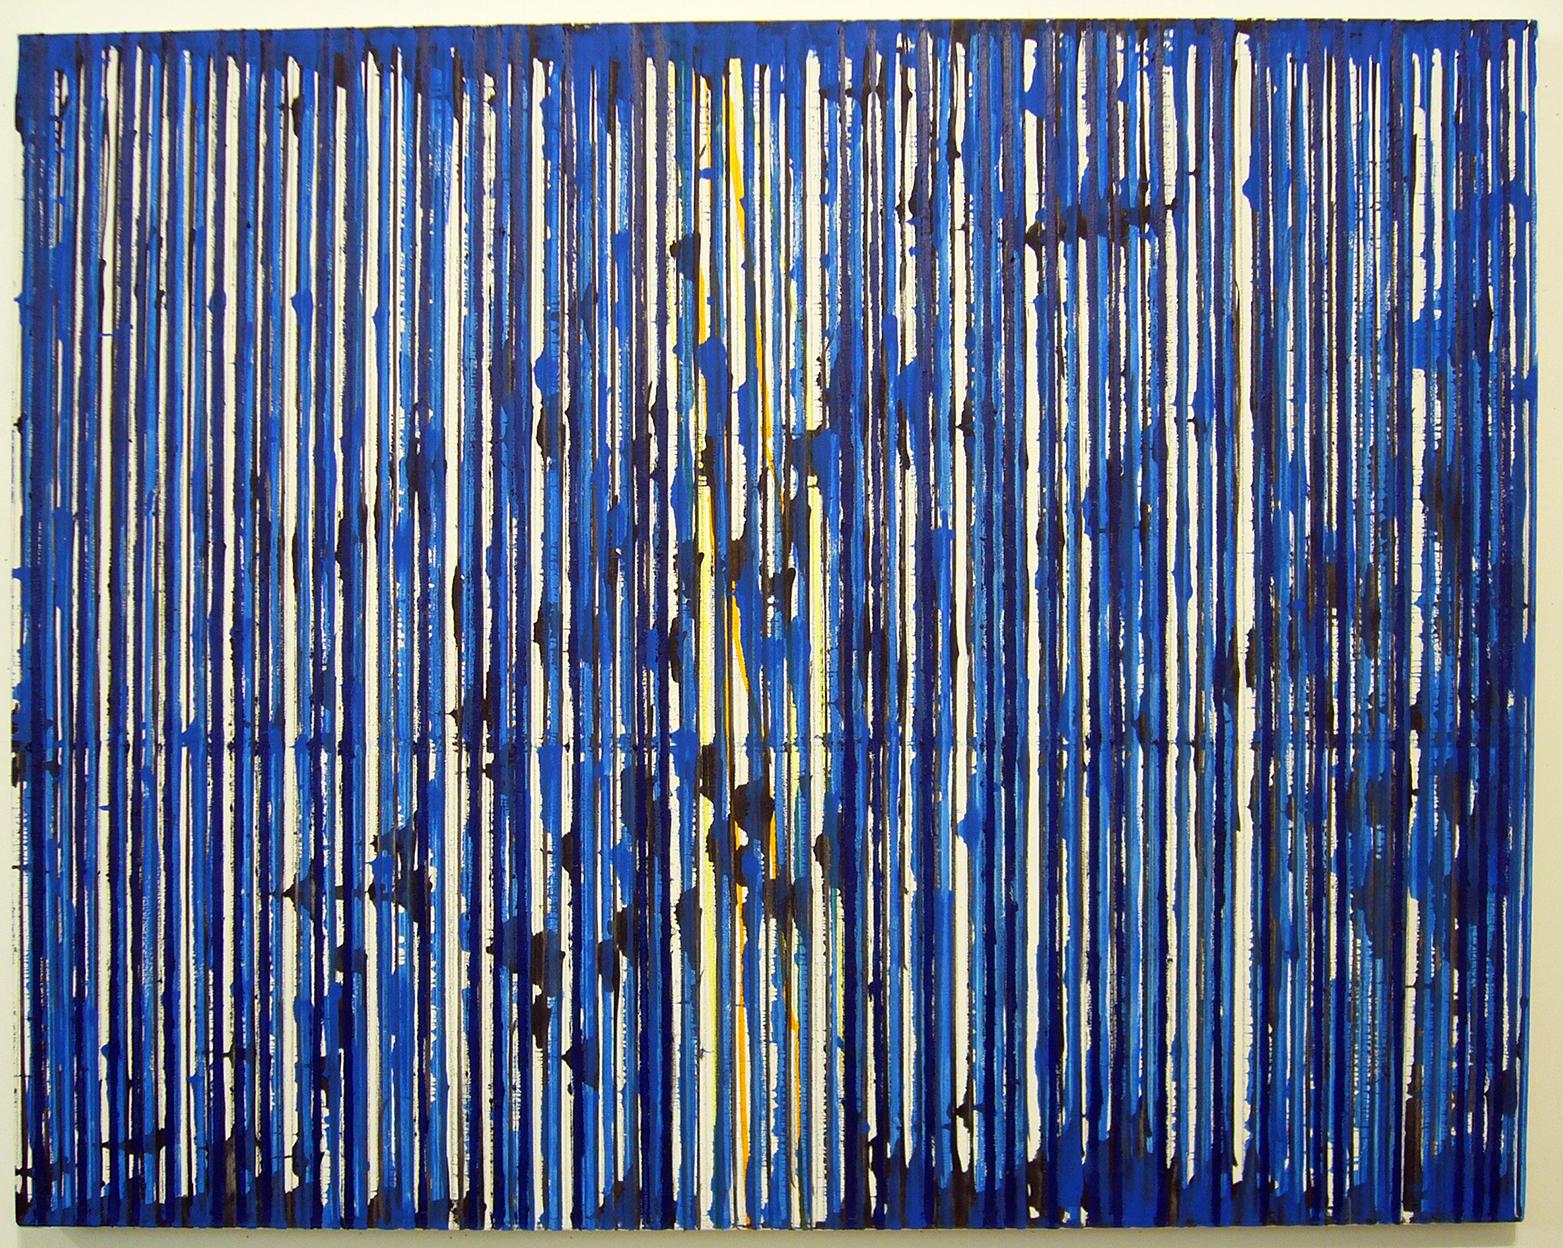 Untitled Big Stripes by Ann Chisholm.
Mixed media on canvas. 

Communication or communicating is a theme in Ann Chisholm's work, especially in the collages. She uses words, numbers, and symbols to give visual hints. Morse Code is an important